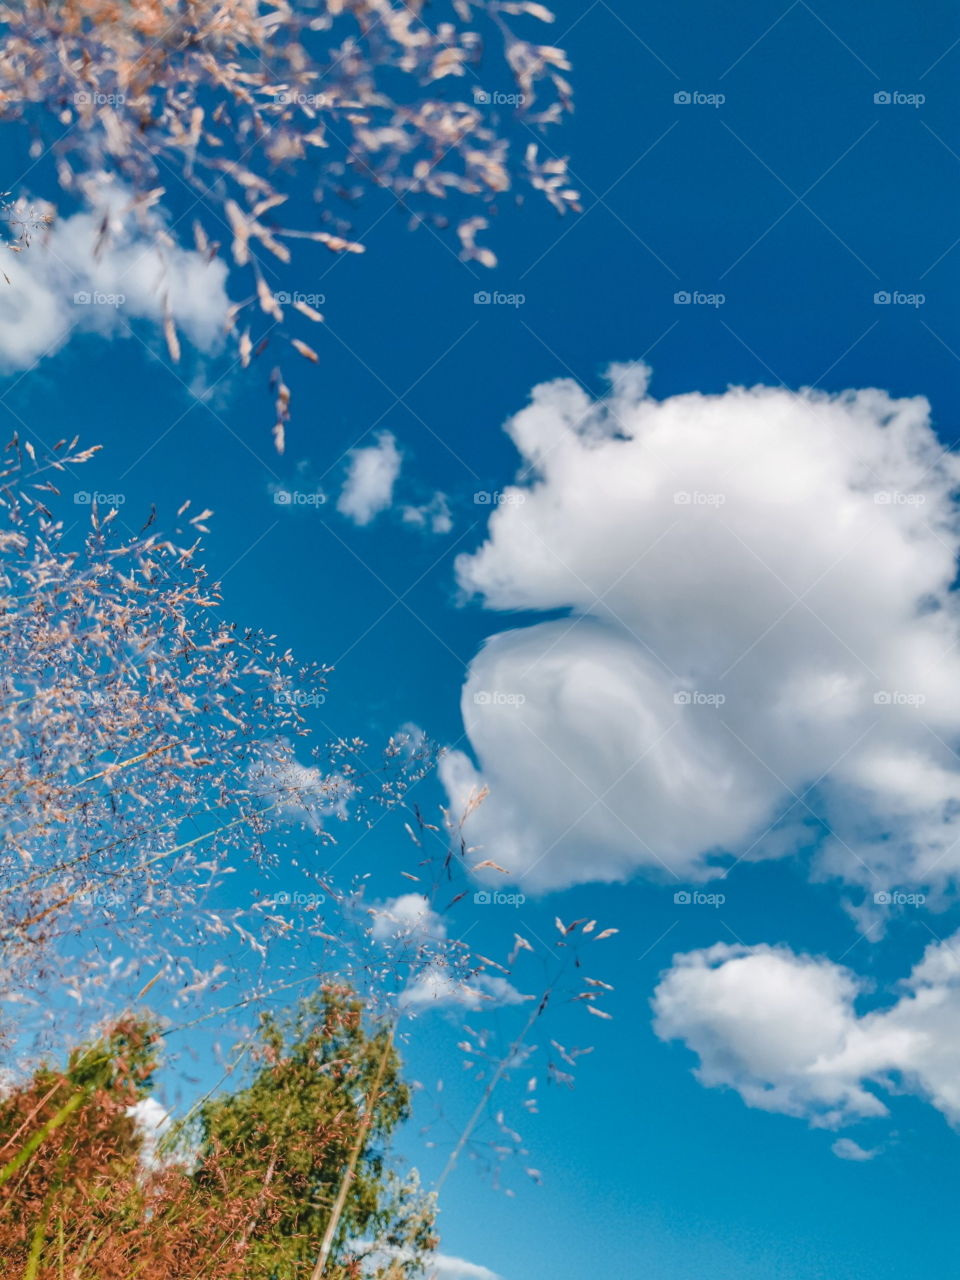 Clouds and grass seeds above